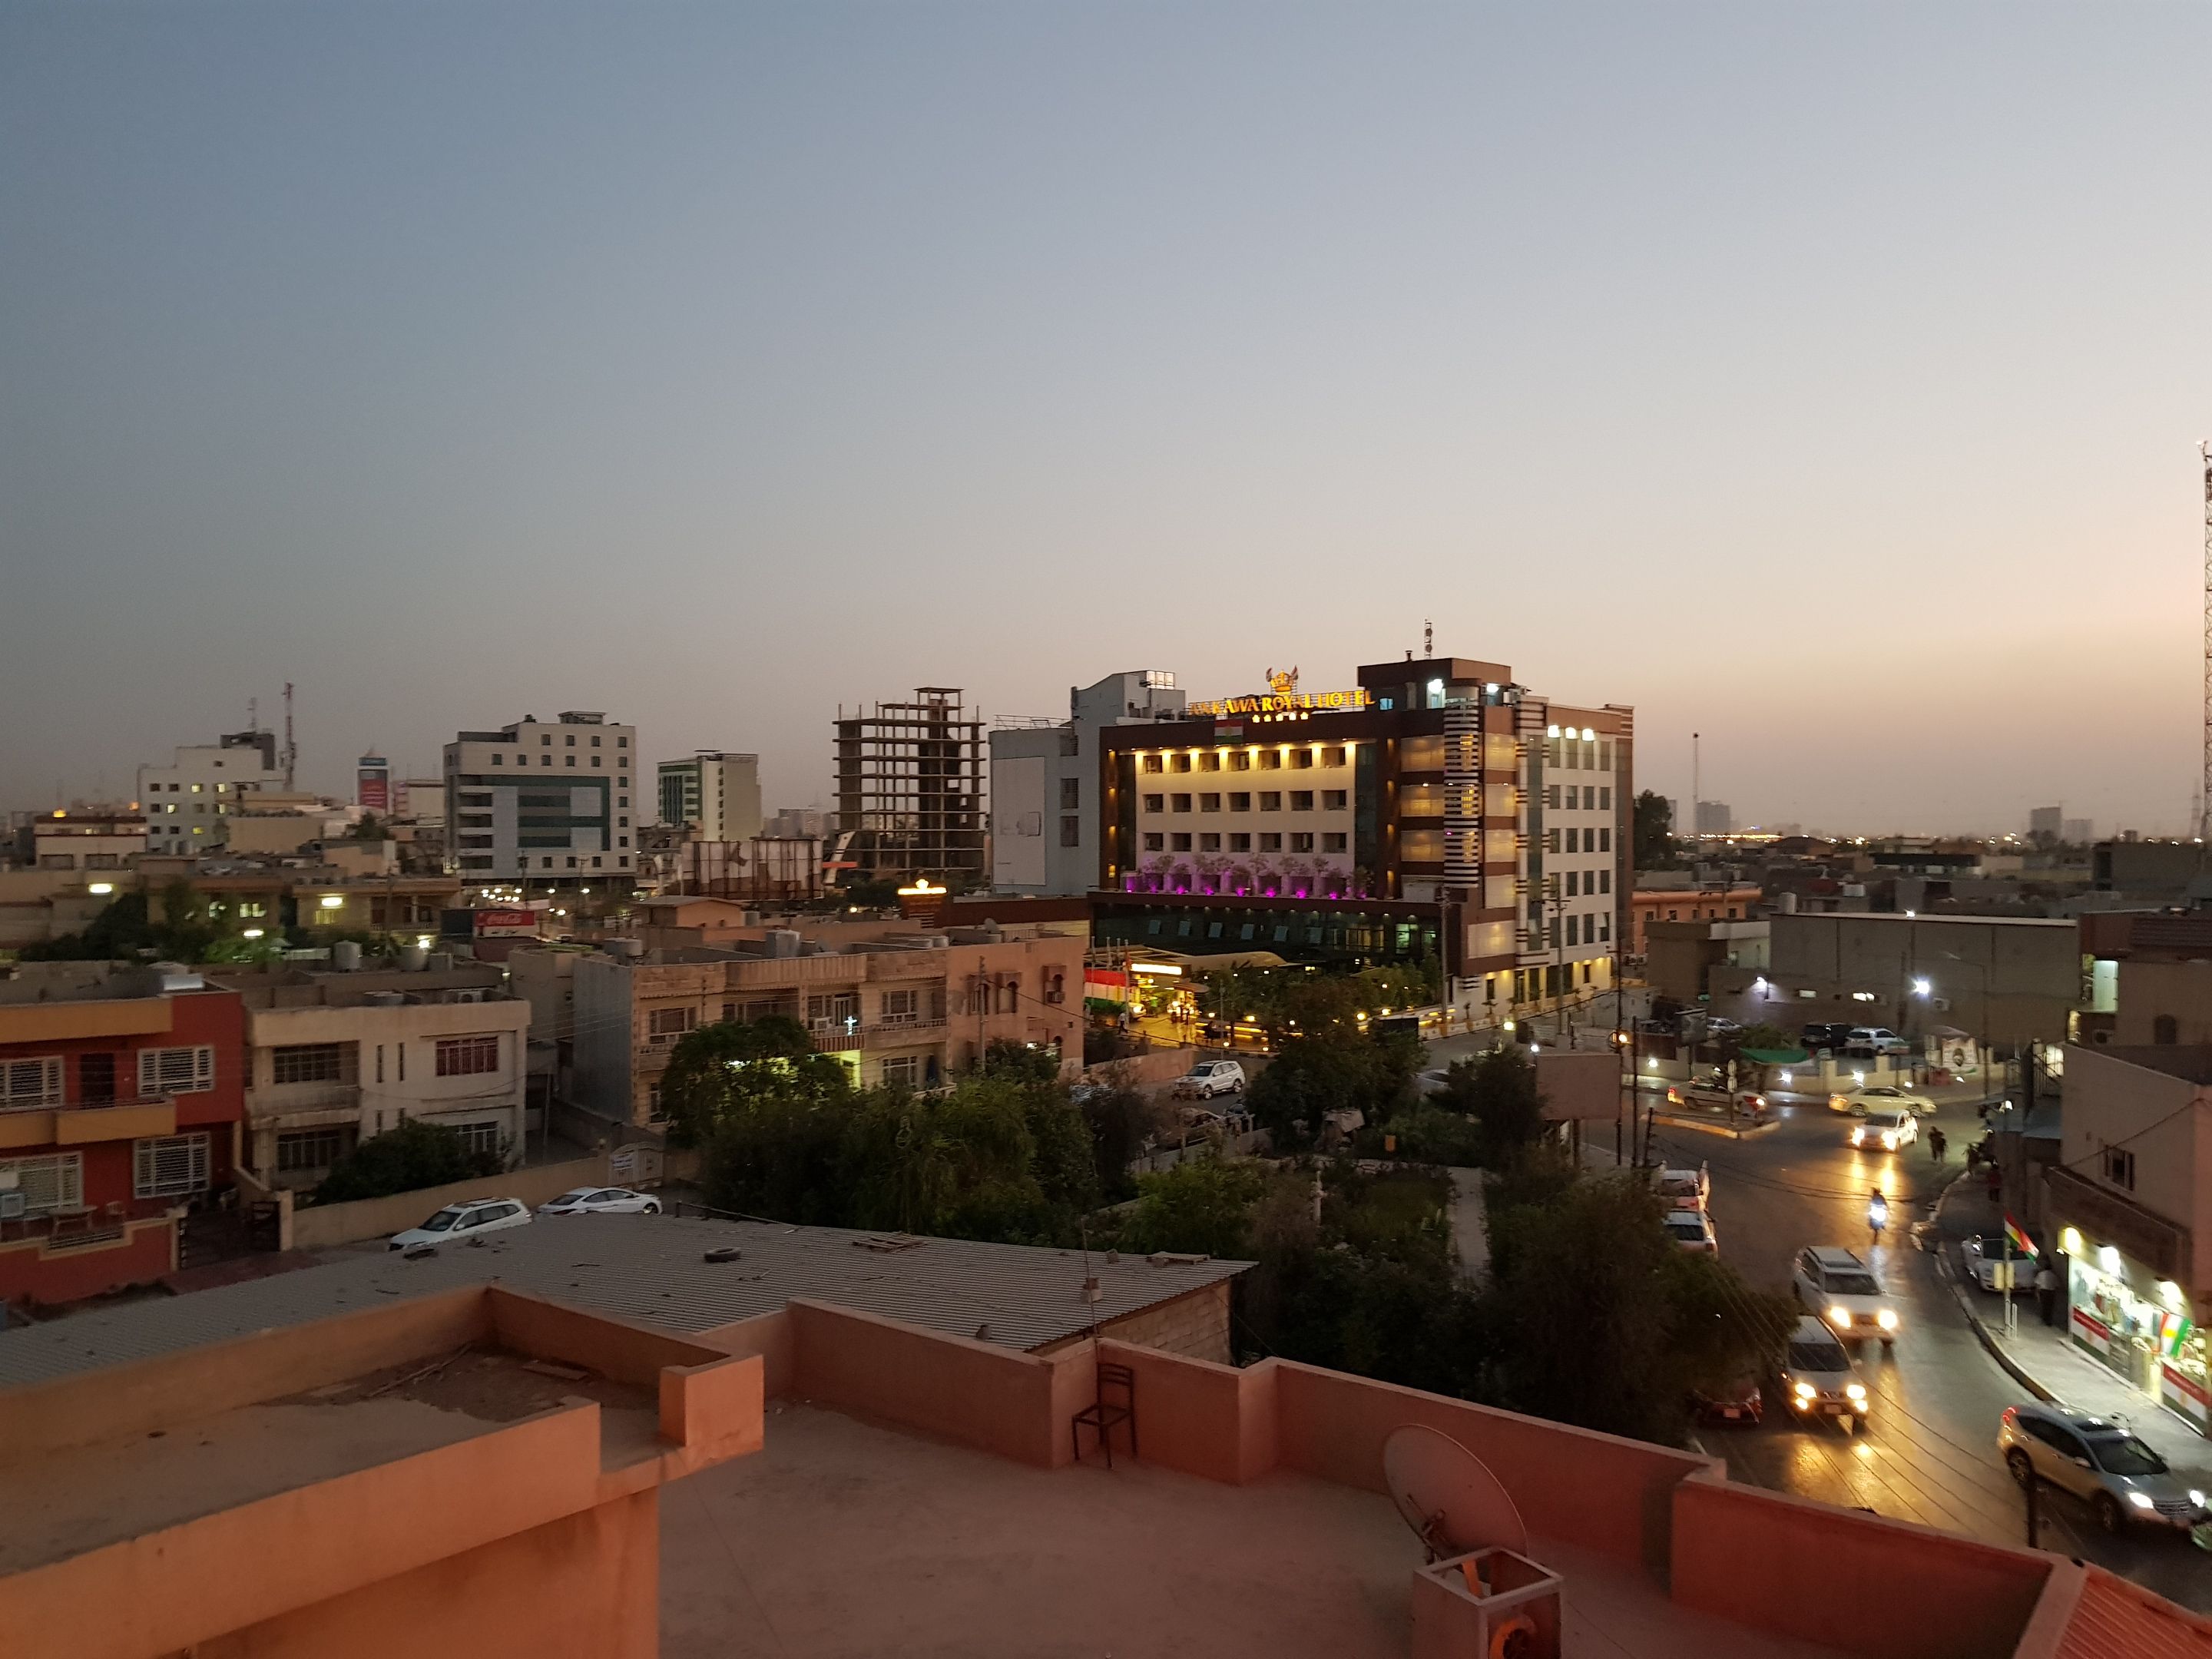 The Ankawa neighborhood in Erbil, during sunset one evening ahead of an independence referendum. Image by Kenneth R. Rosen. Iraq, 2017.